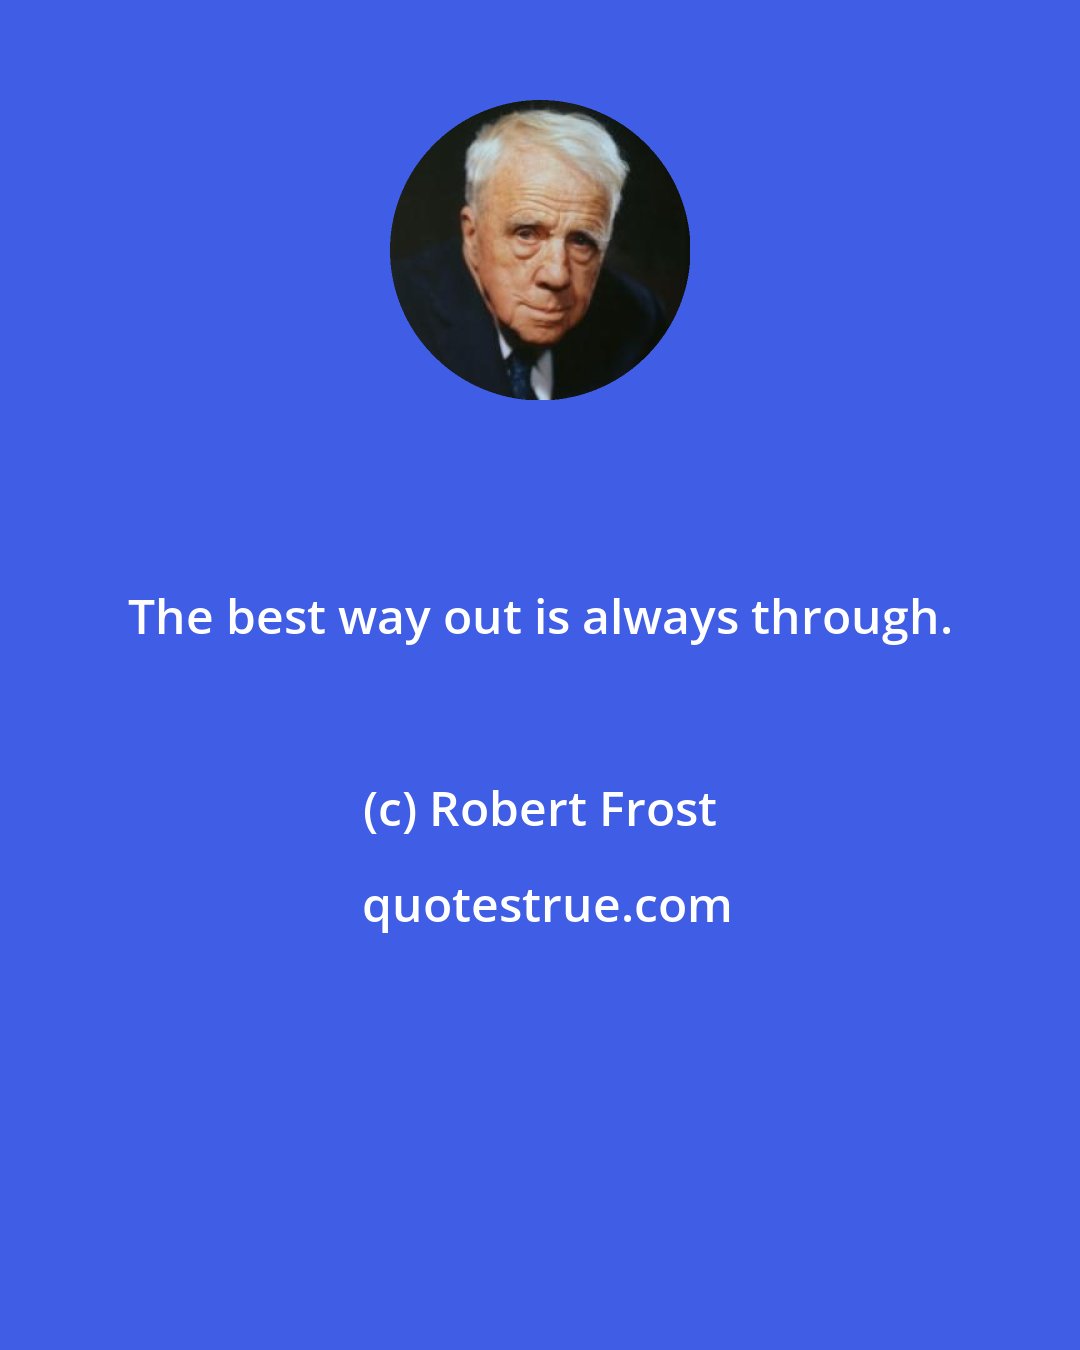 Robert Frost: The best way out is always through.